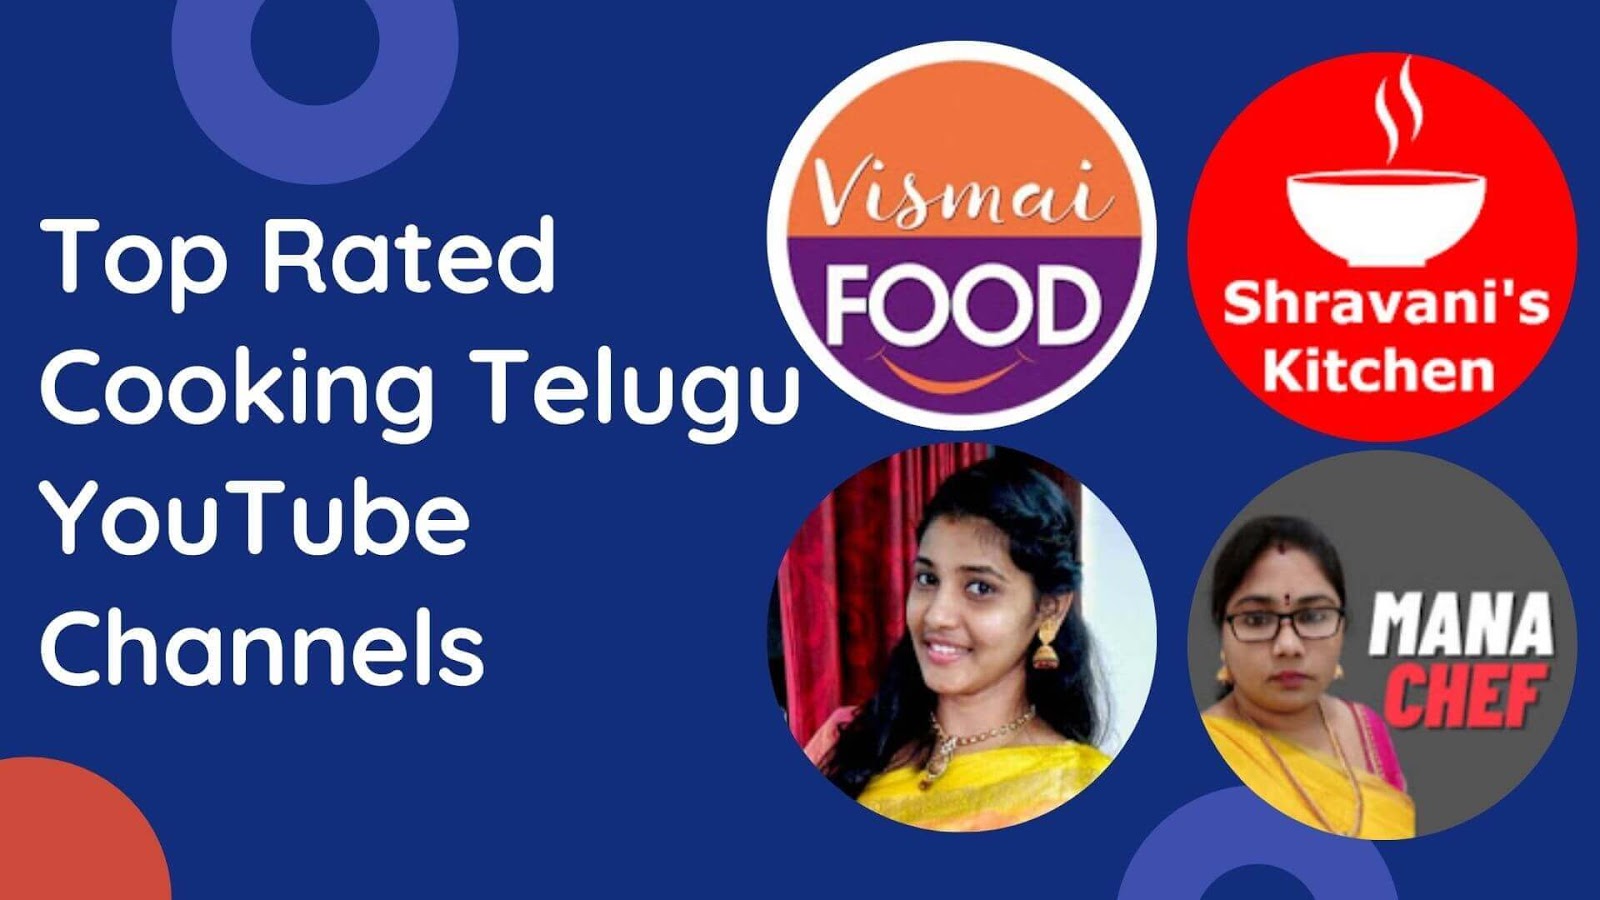 10 Best Telugu Cooking Channels On YouTube 2021